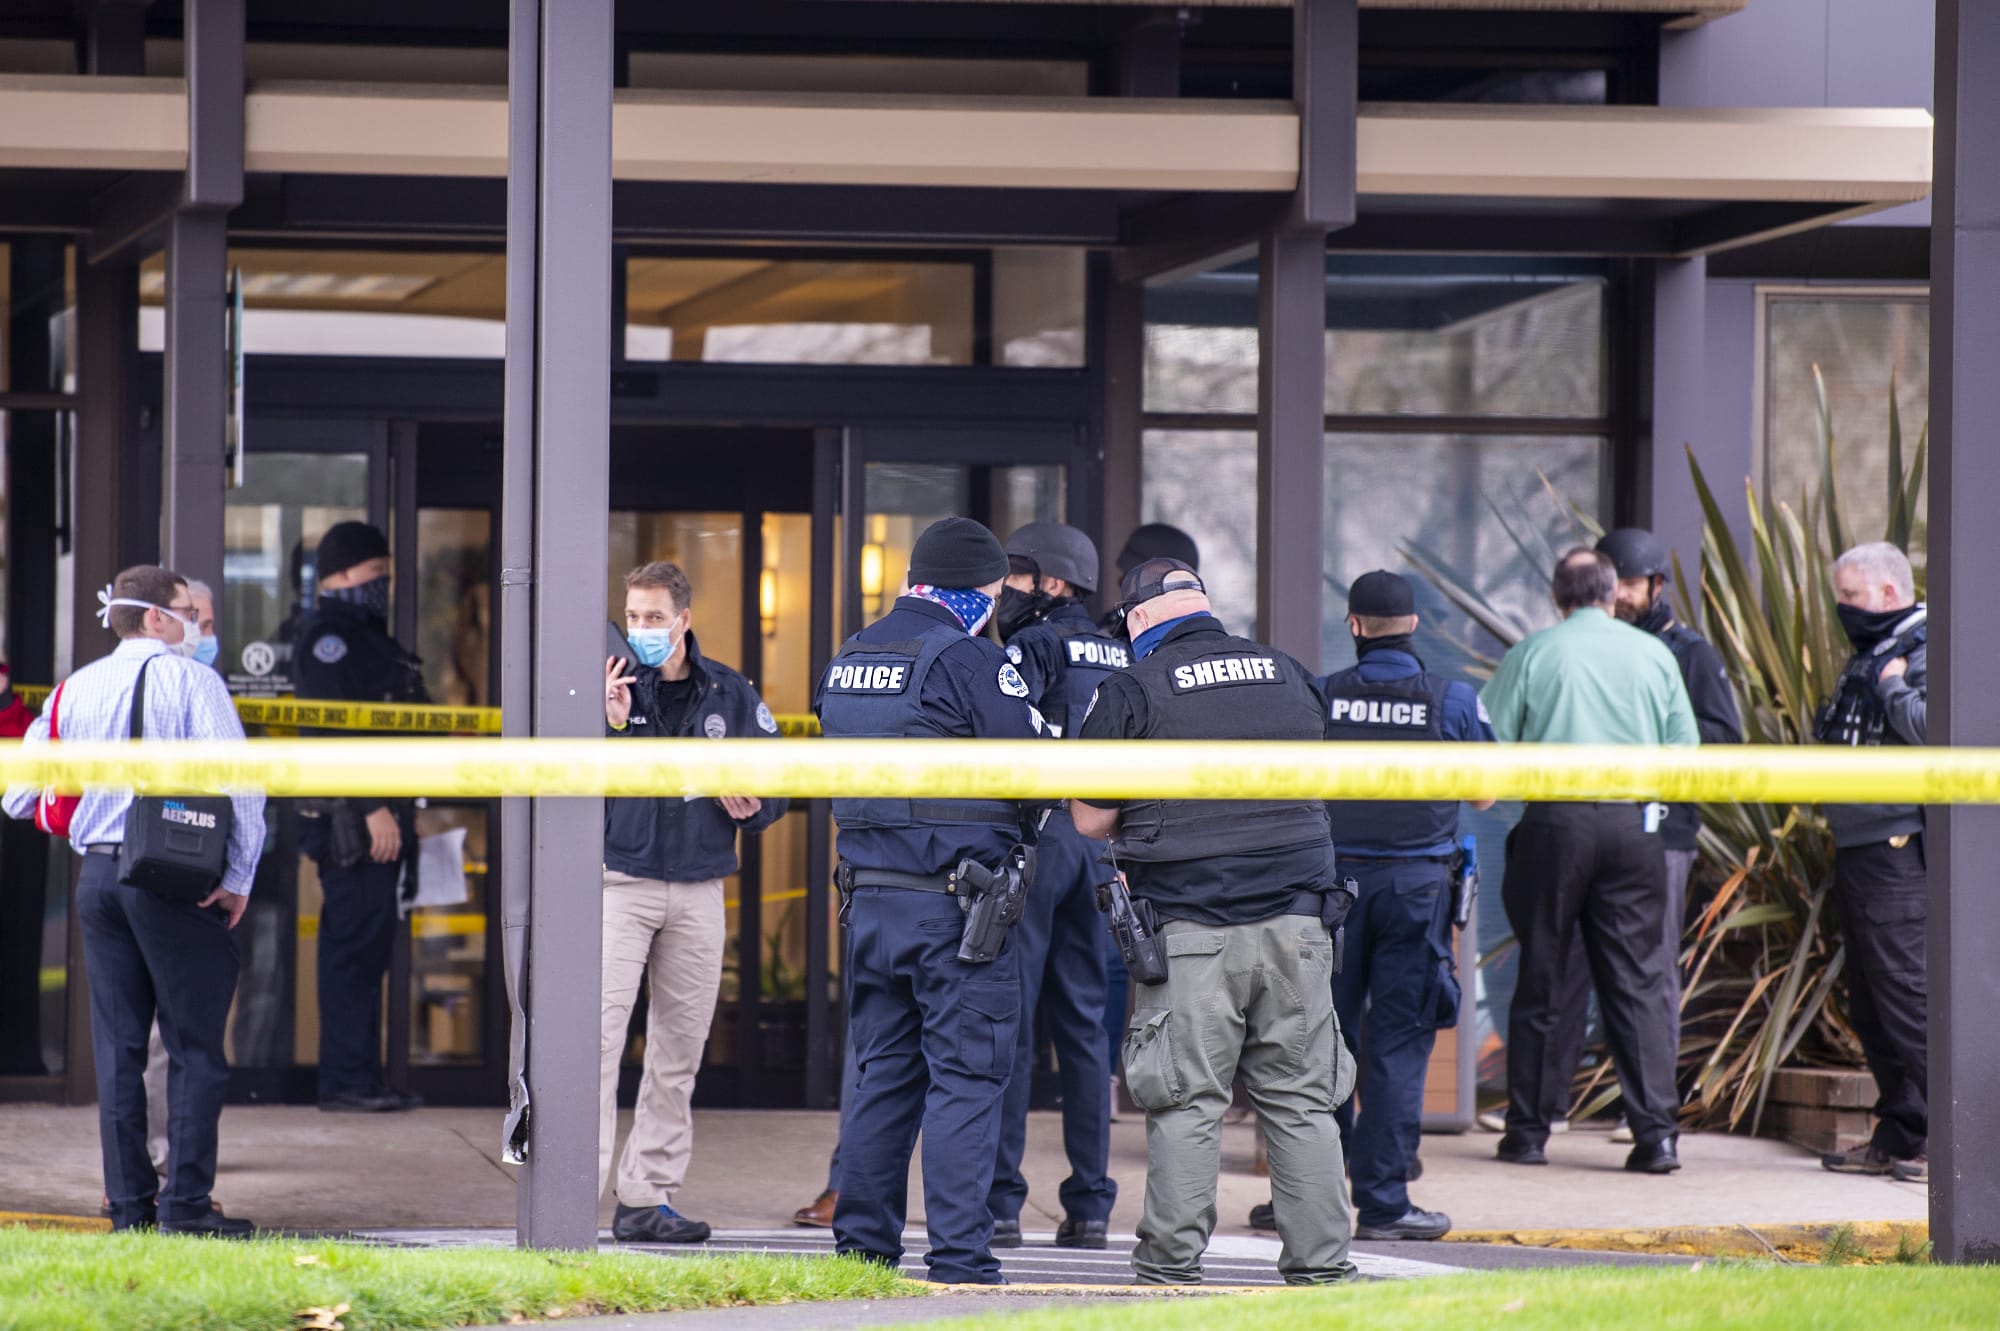 Police officers and officials congregate outside the building where a shooting reportedly happened on Tuesday, December 22, at the 505 building at the PeaceHealth Southwest Medical Center.